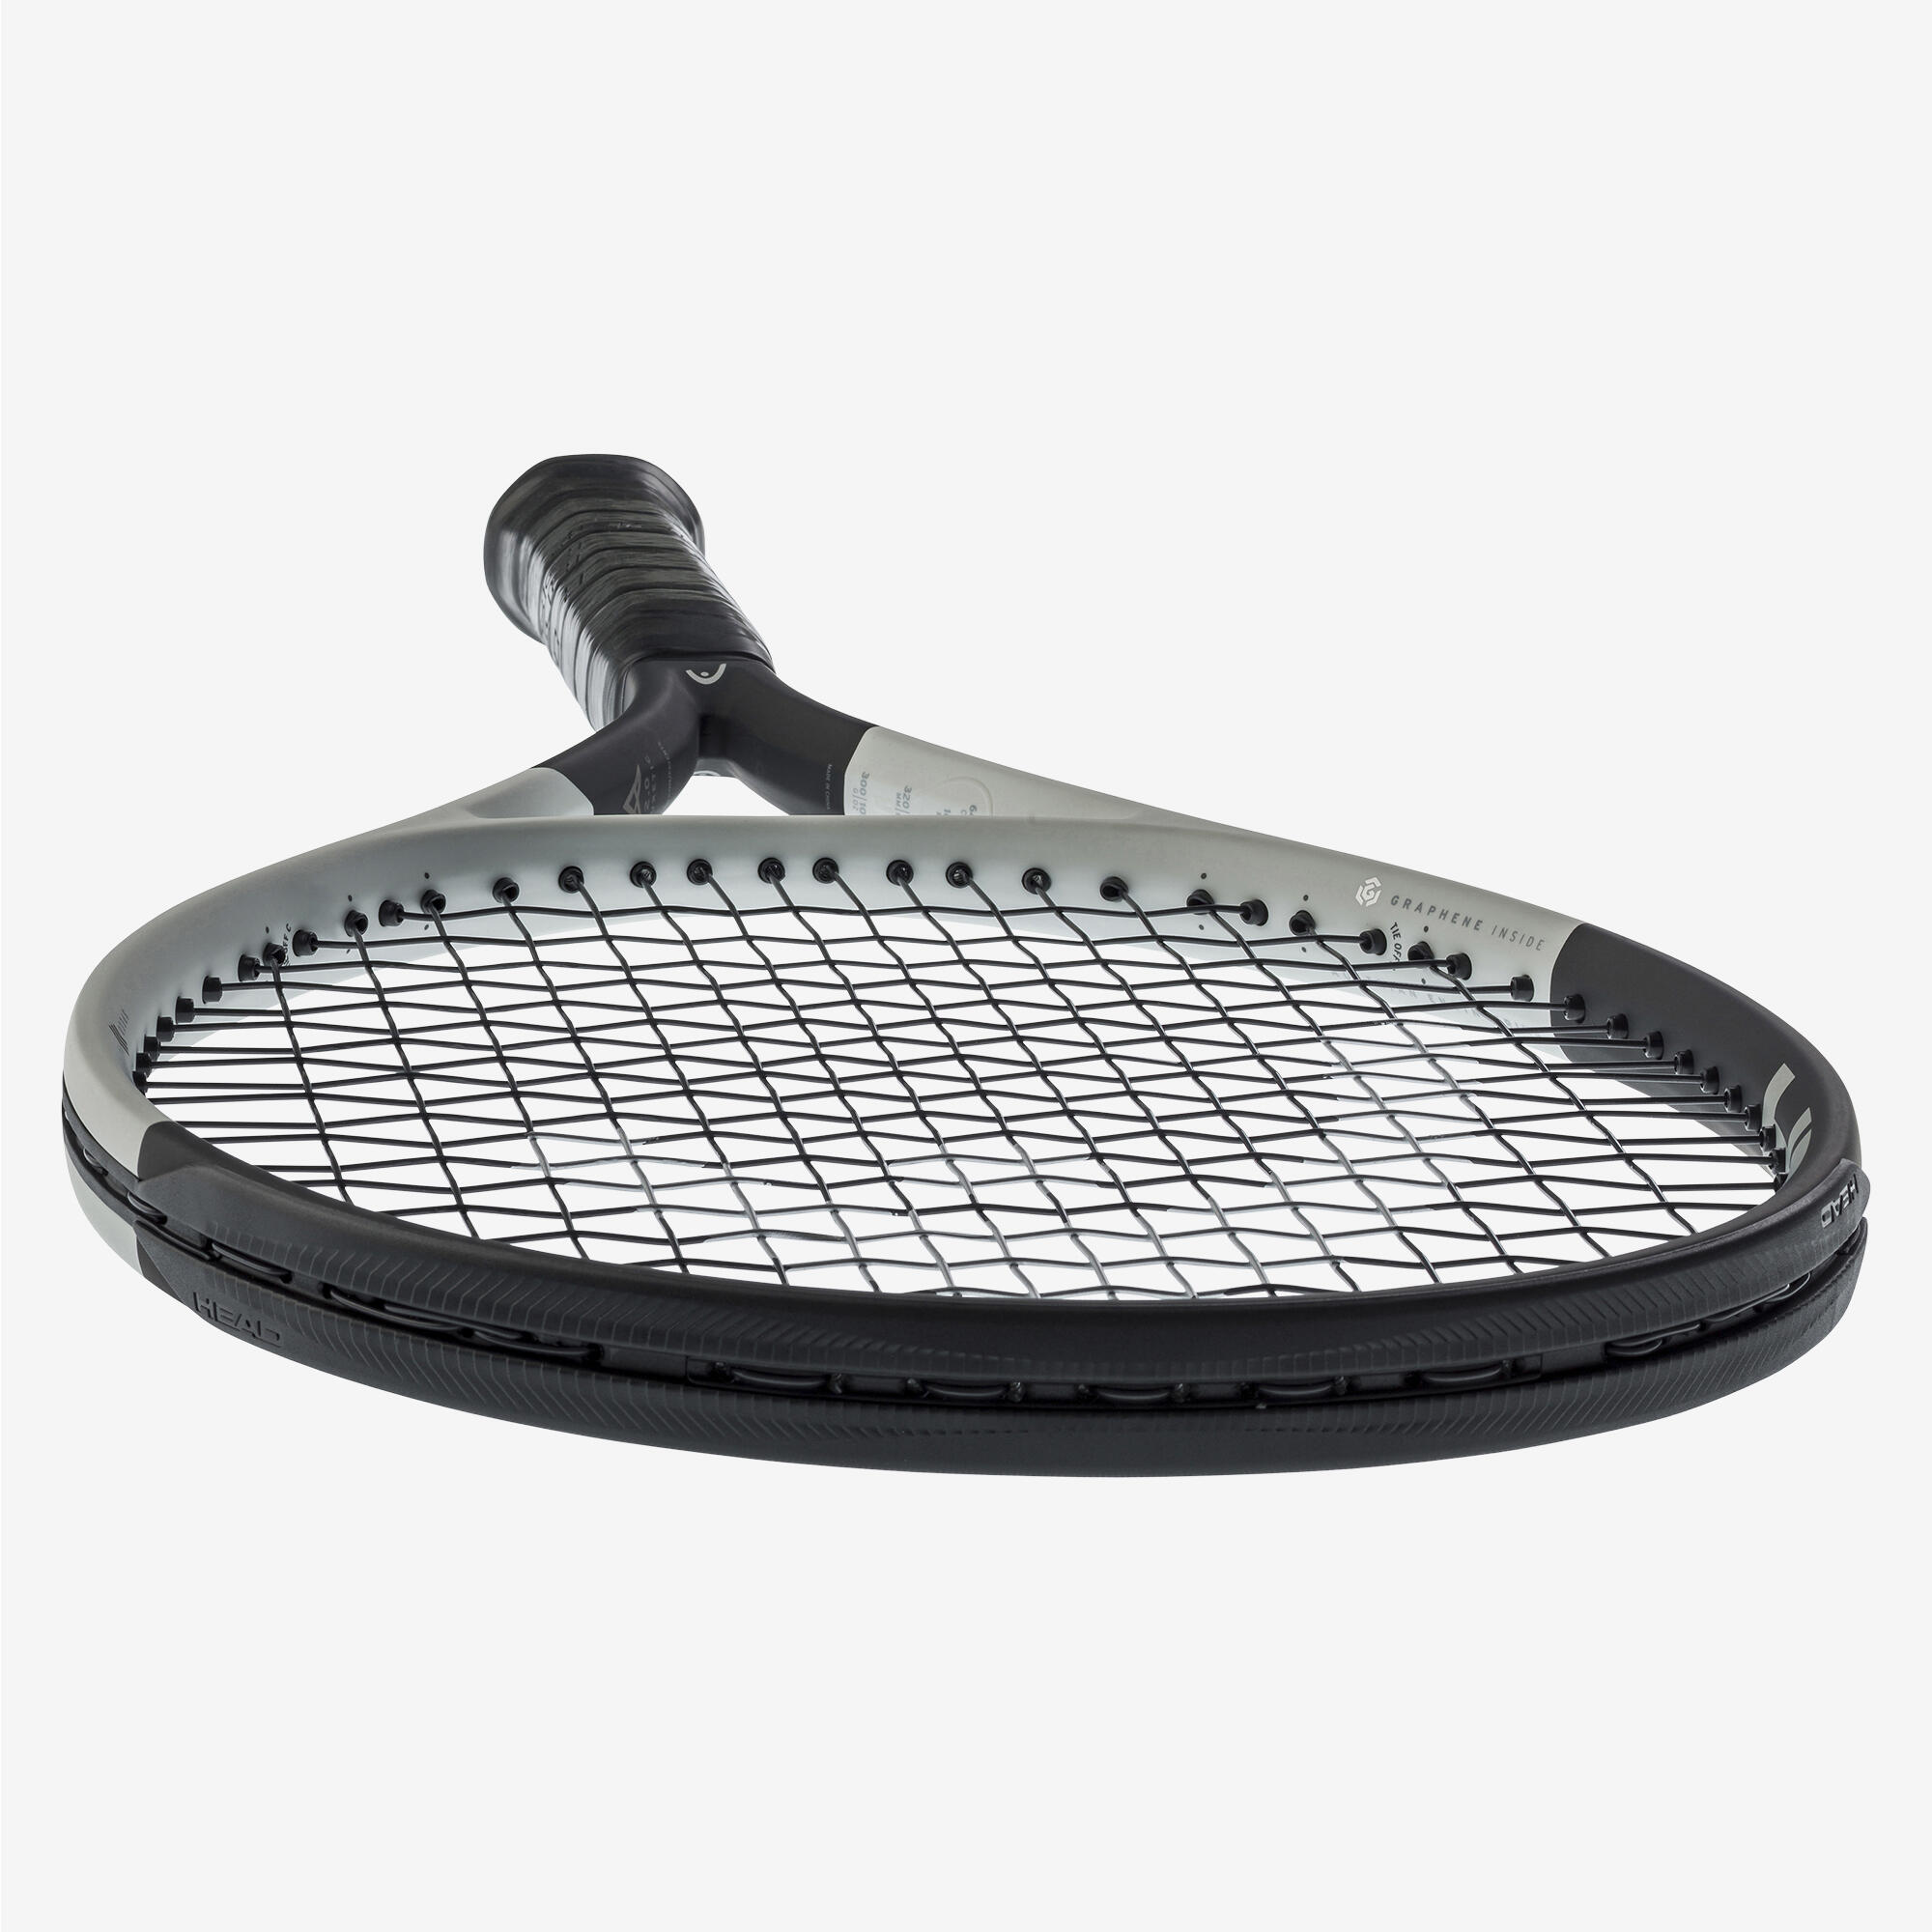 Adult Tennis Racket Auxetic Speed MP 2024 300g - Black/White 10/13